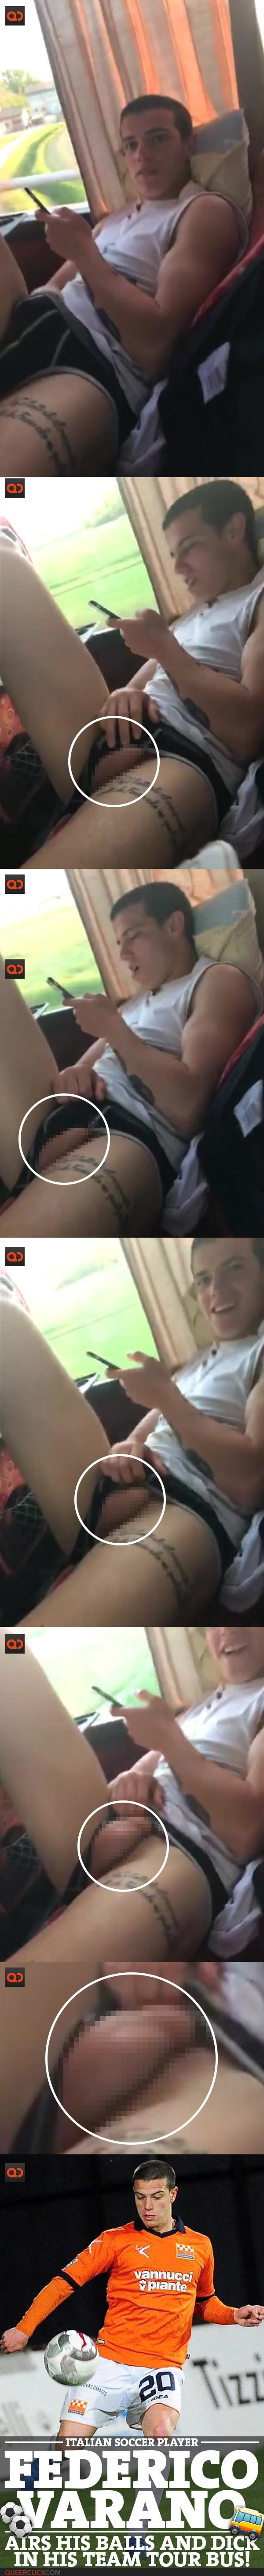 Federico Varano, Italian Soccer Player, Airs His Balls And Dick In His Team Tour Bus!